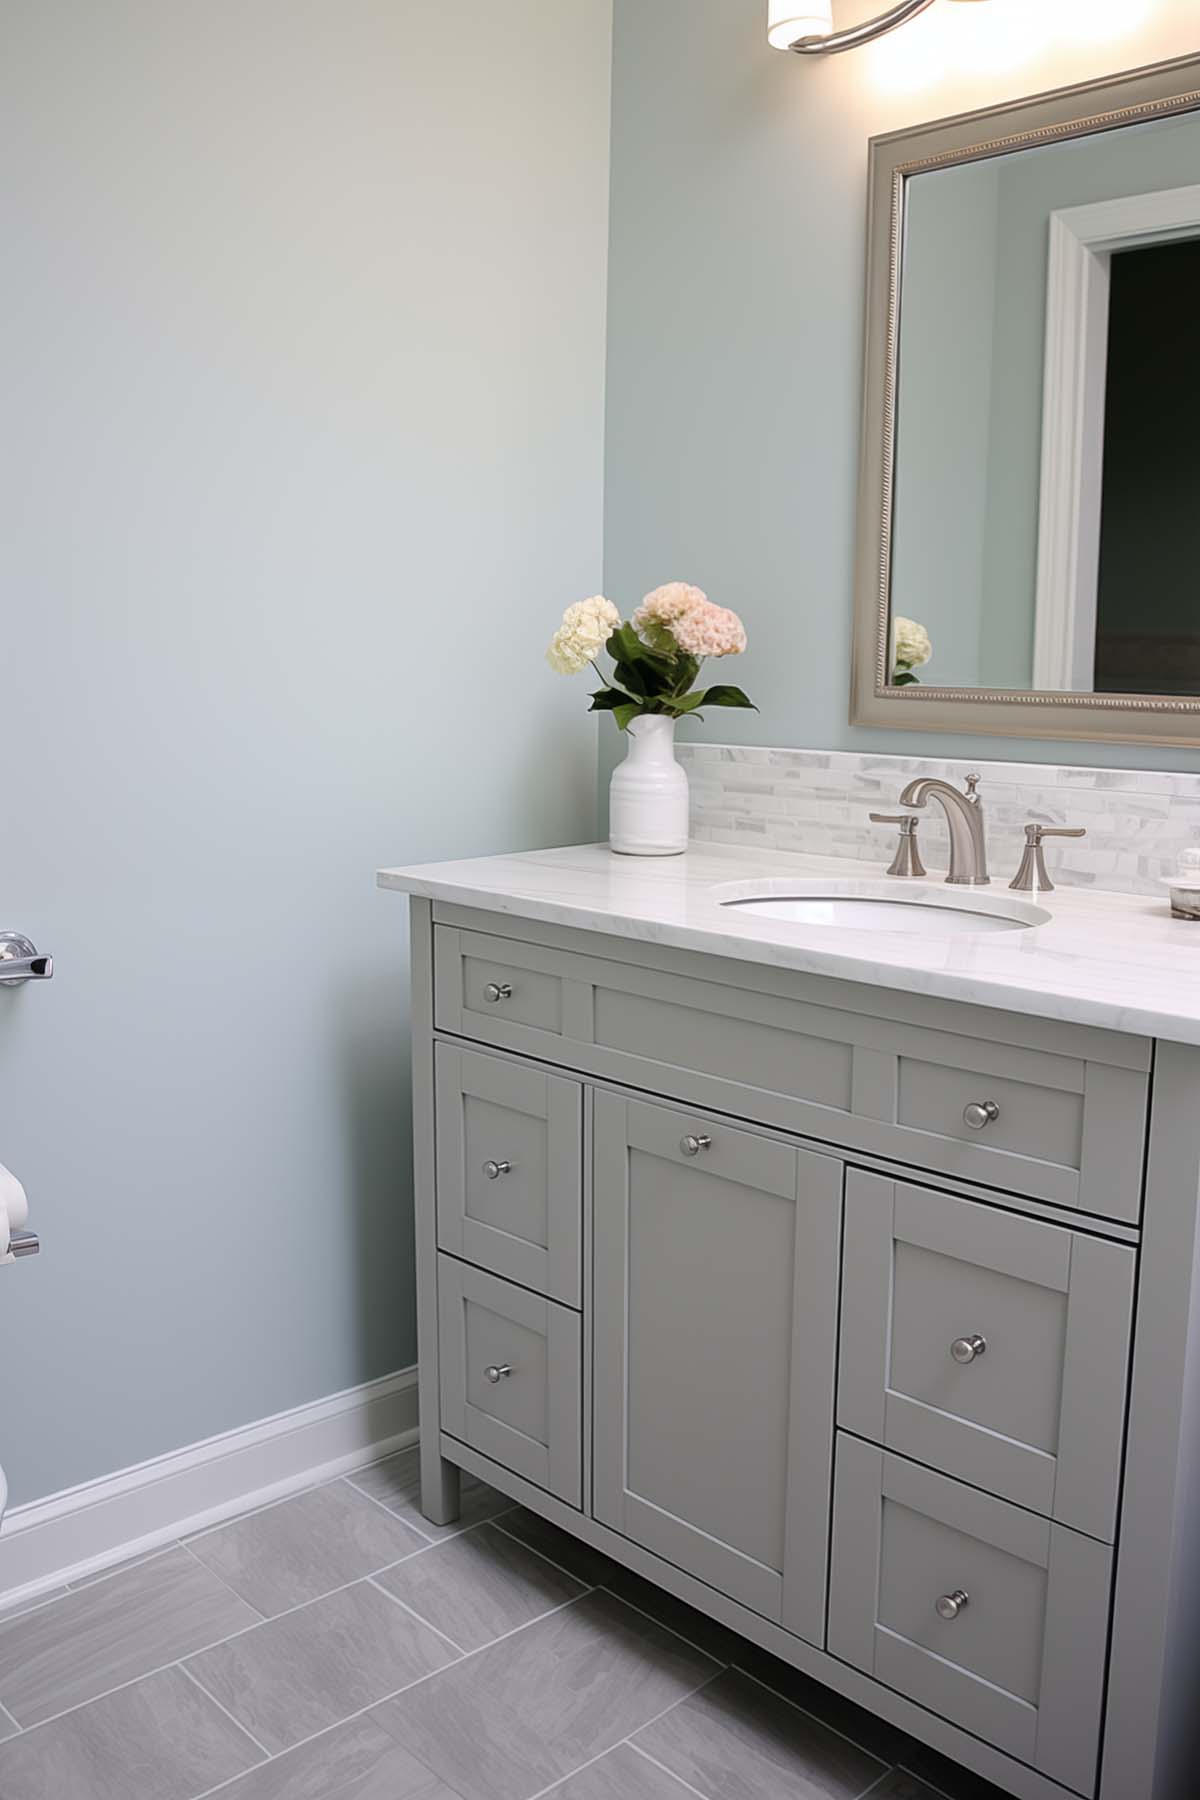 A bathroom with walls painted in sherwin williams sea salt